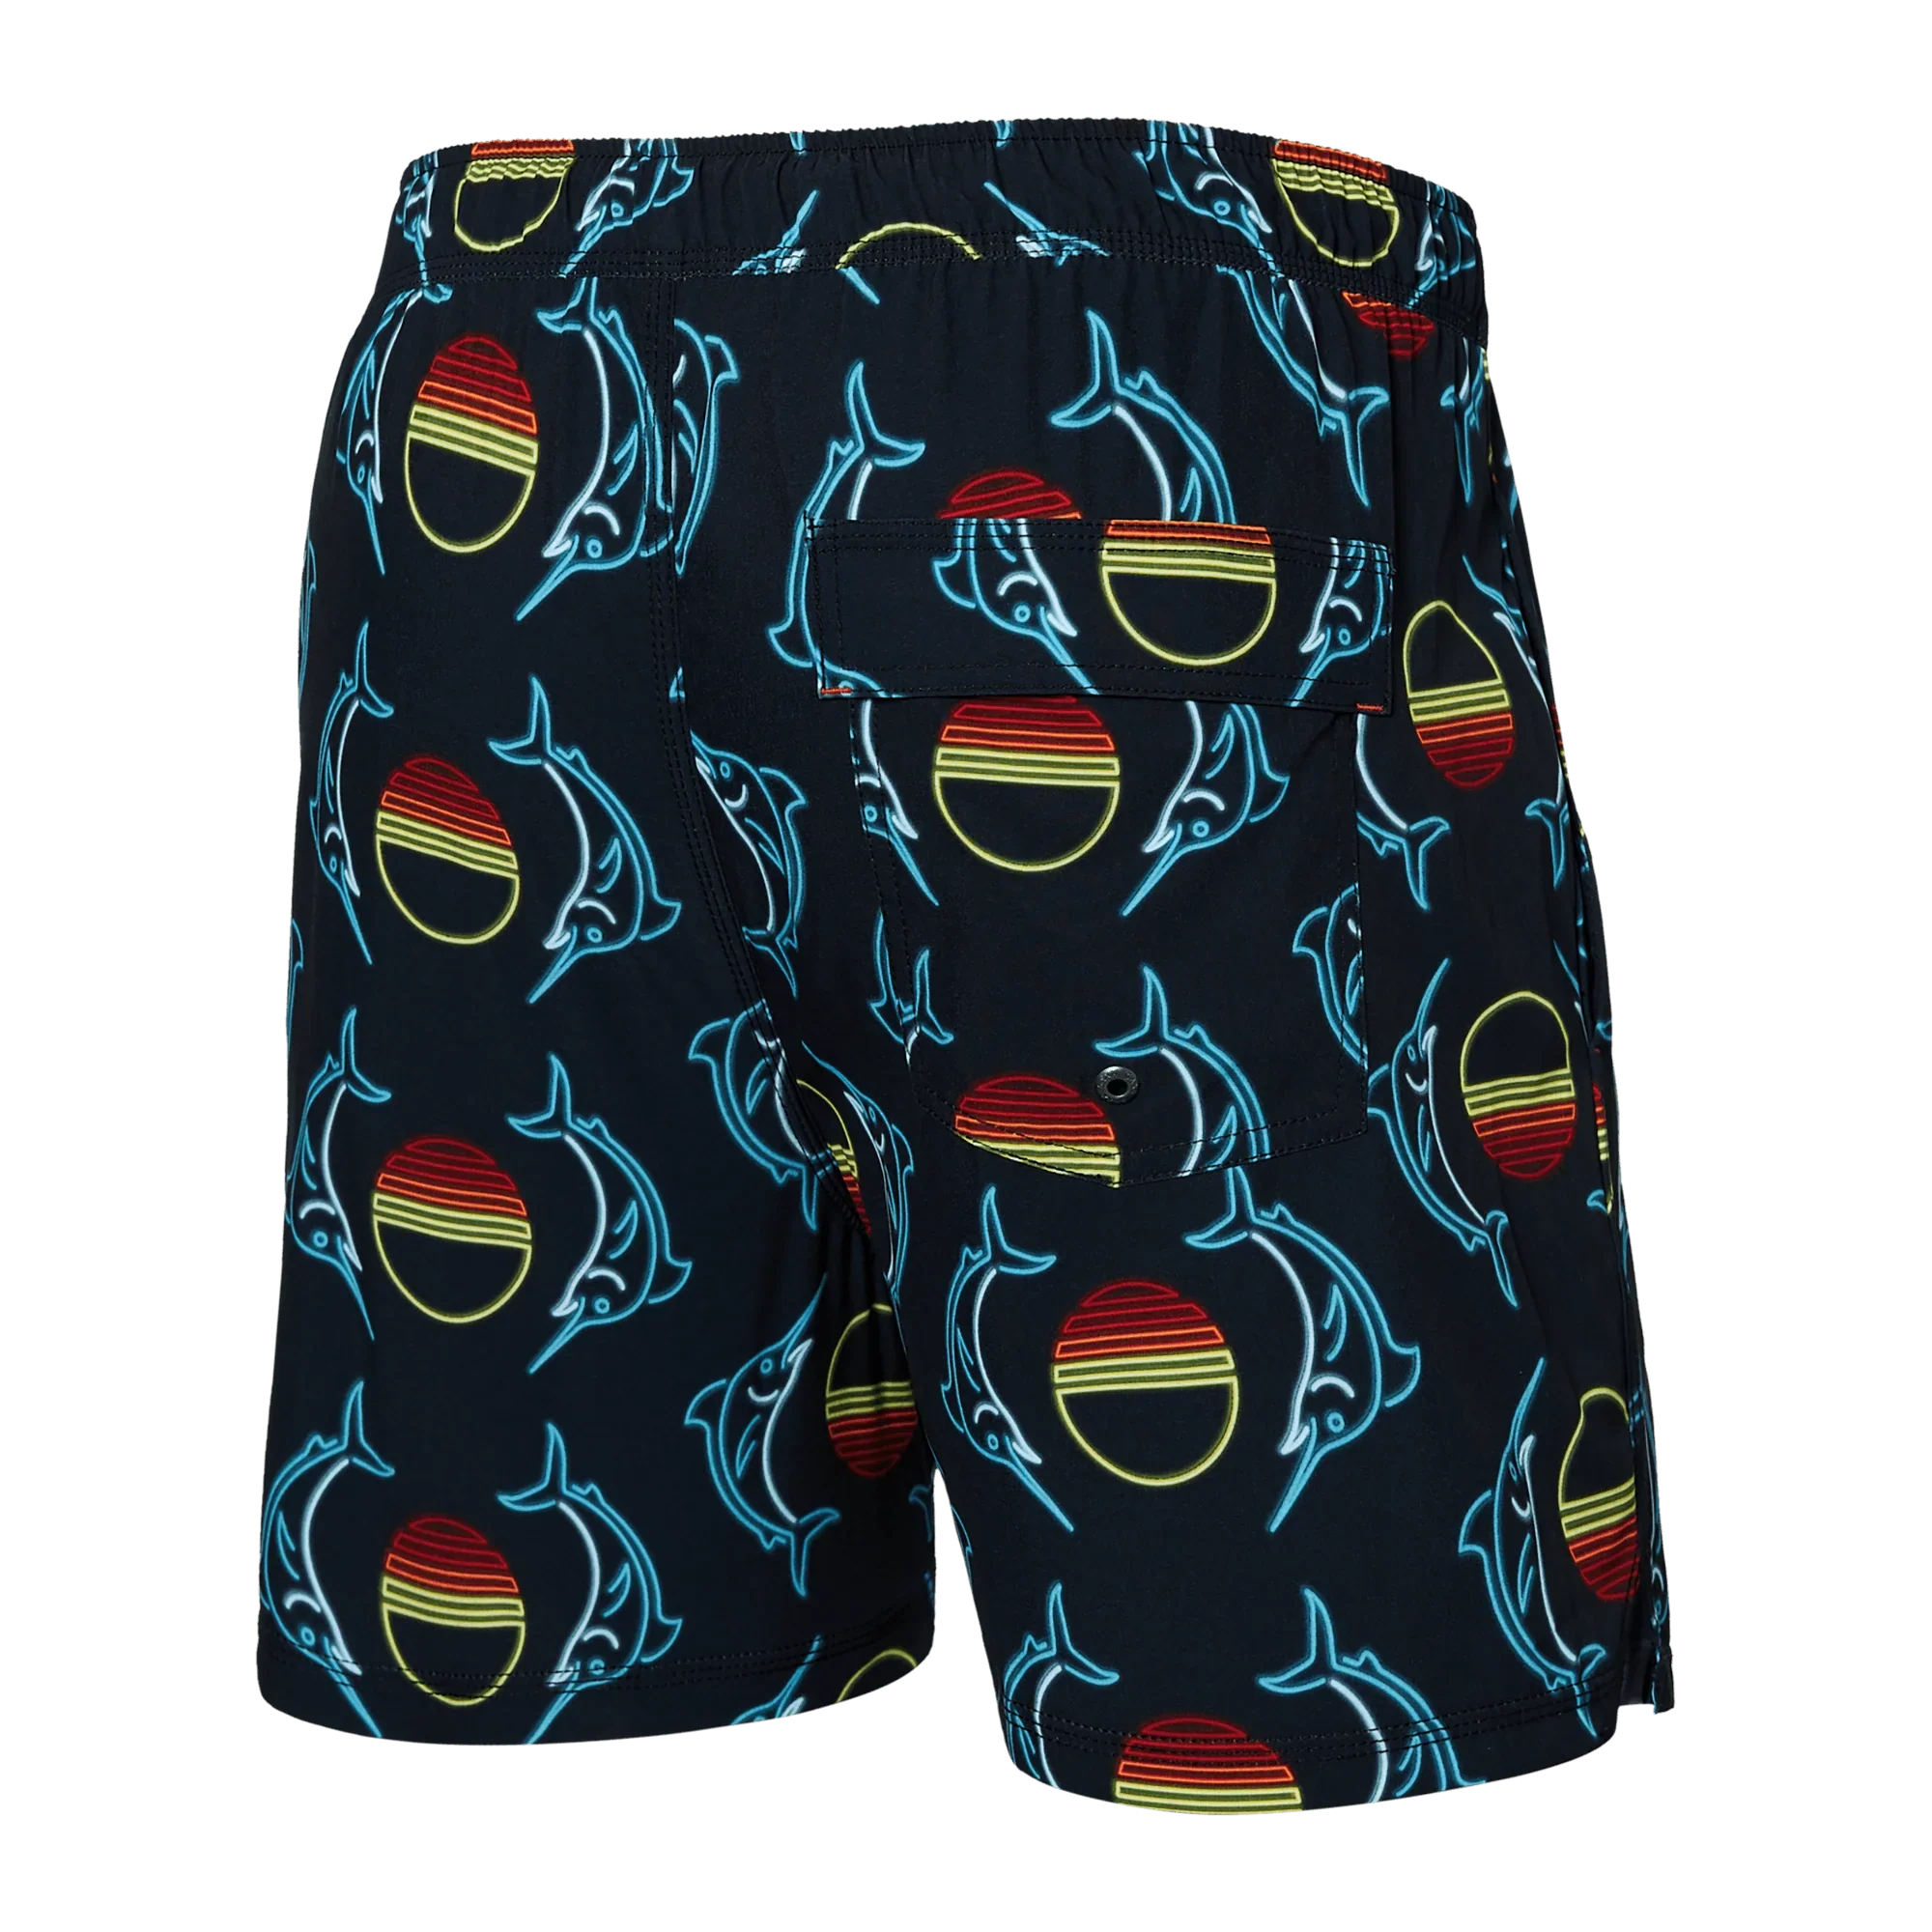 'SAXX Oh Buoy 5" Swim Shorts' in 'Sunset Crest' colour